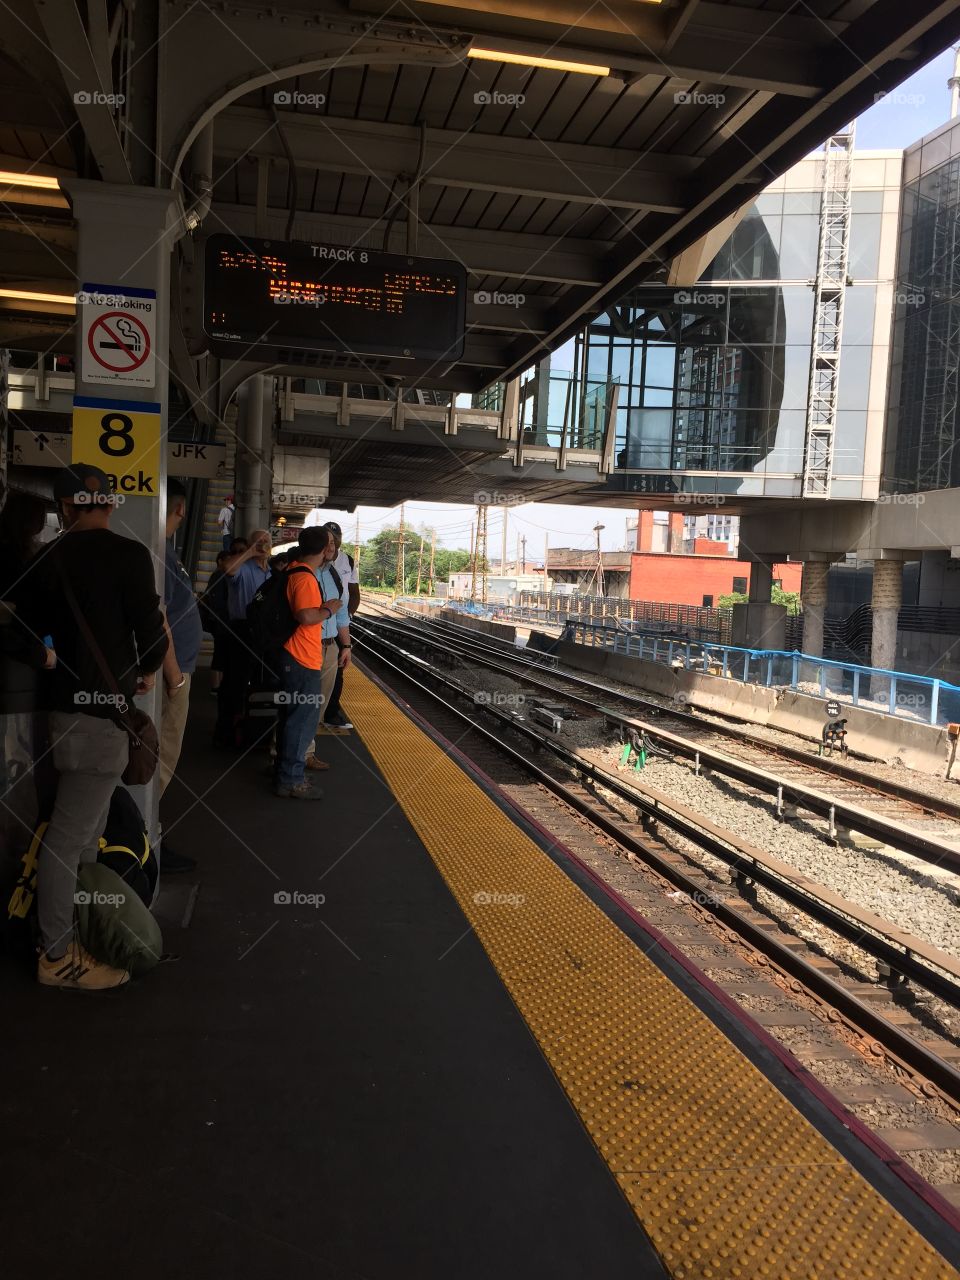 Long Island Rail Road train platform in Jamaica, New York City with commuters and train tracks.